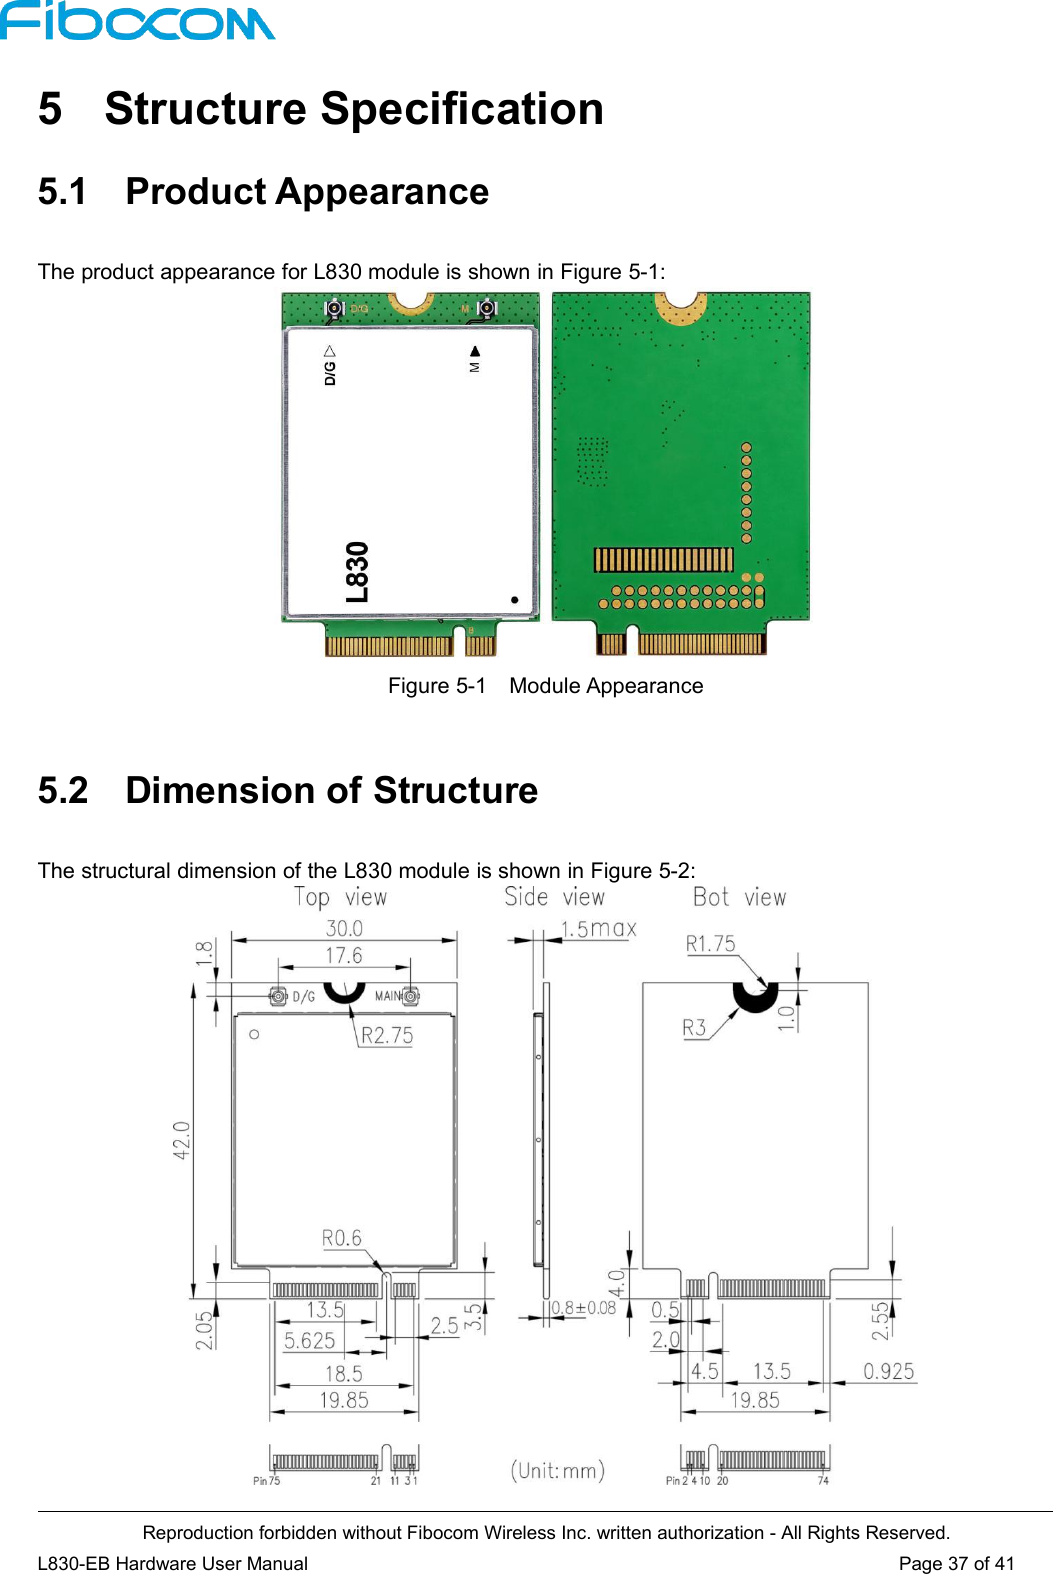 Reproduction forbidden without Fibocom Wireless Inc. written authorization - All Rights Reserved.L830-EB Hardware User Manual Page 37 of 415 Structure Specification5.1 Product AppearanceThe product appearance for L830 module is shown in Figure 5-1:Figure 5-1 Module Appearance5.2 Dimension of StructureThe structural dimension of the L830 module is shown in Figure 5-2: